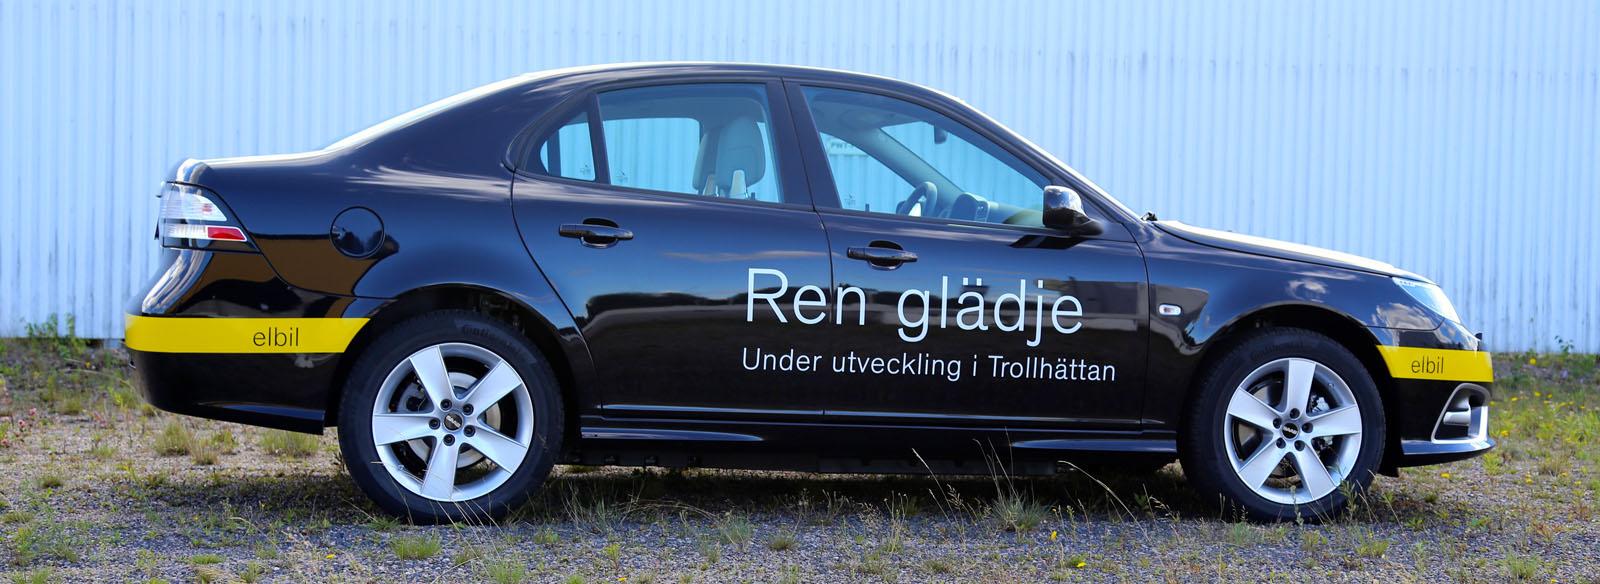 SAAB production Will not be Resumed Soon, NEVS is going to Turnoff 200 Workmen in Sweden